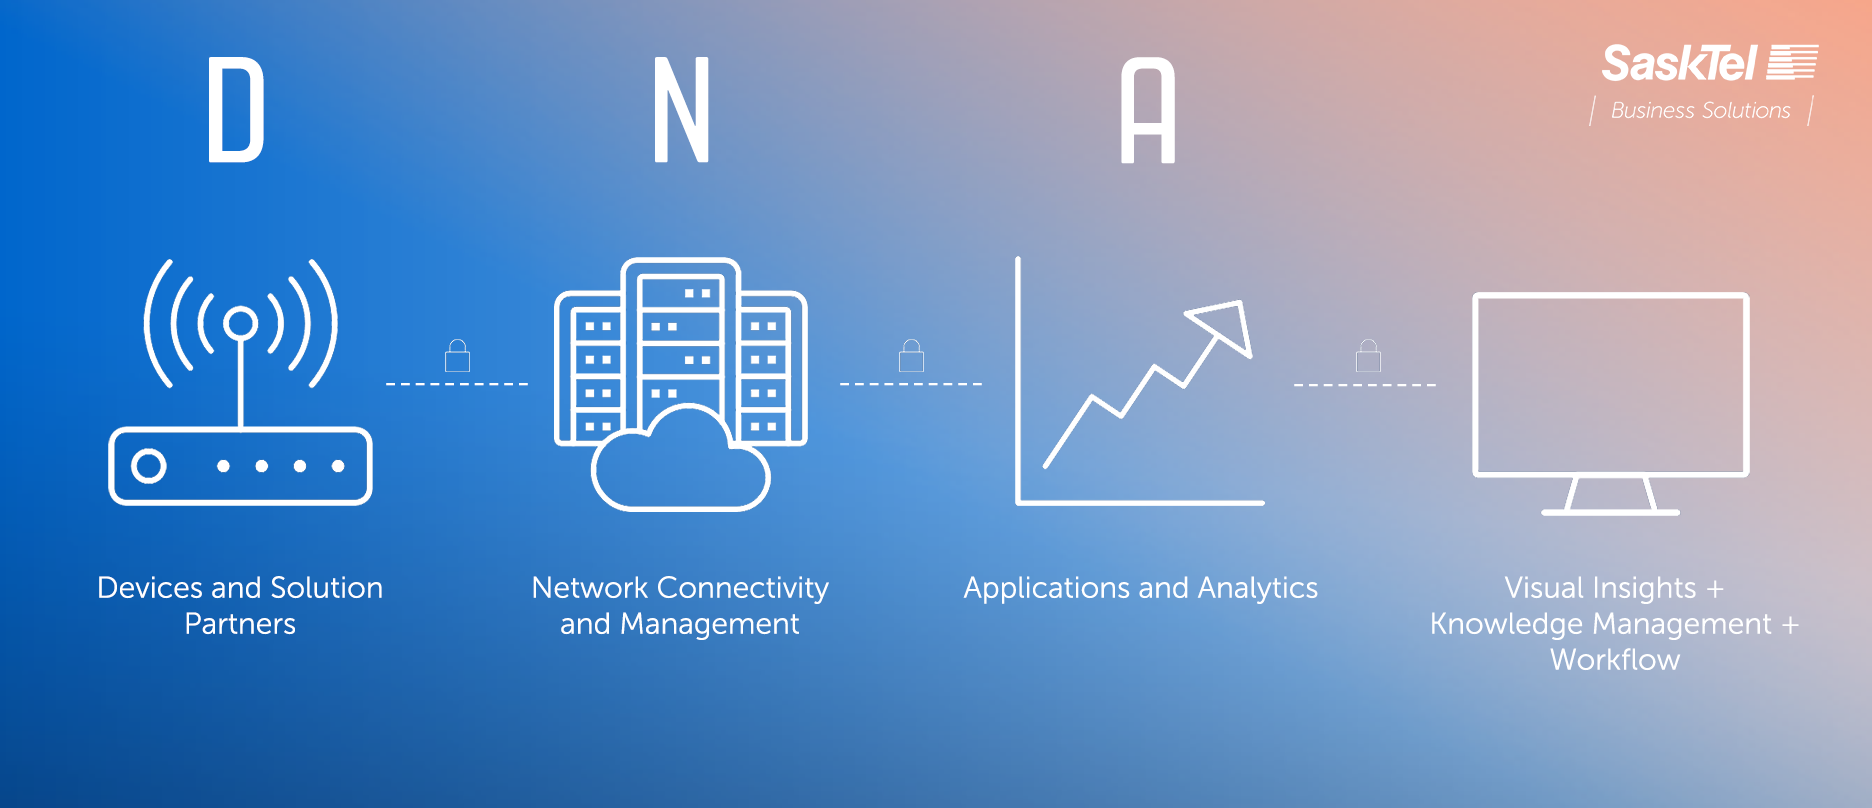 A graphic labelled as DNA: standing for Devices and Solutions Partners, Applications and Analytics, and Applications and Analytics. This results in Visual Insights, Knowledge Management, and Workflow.